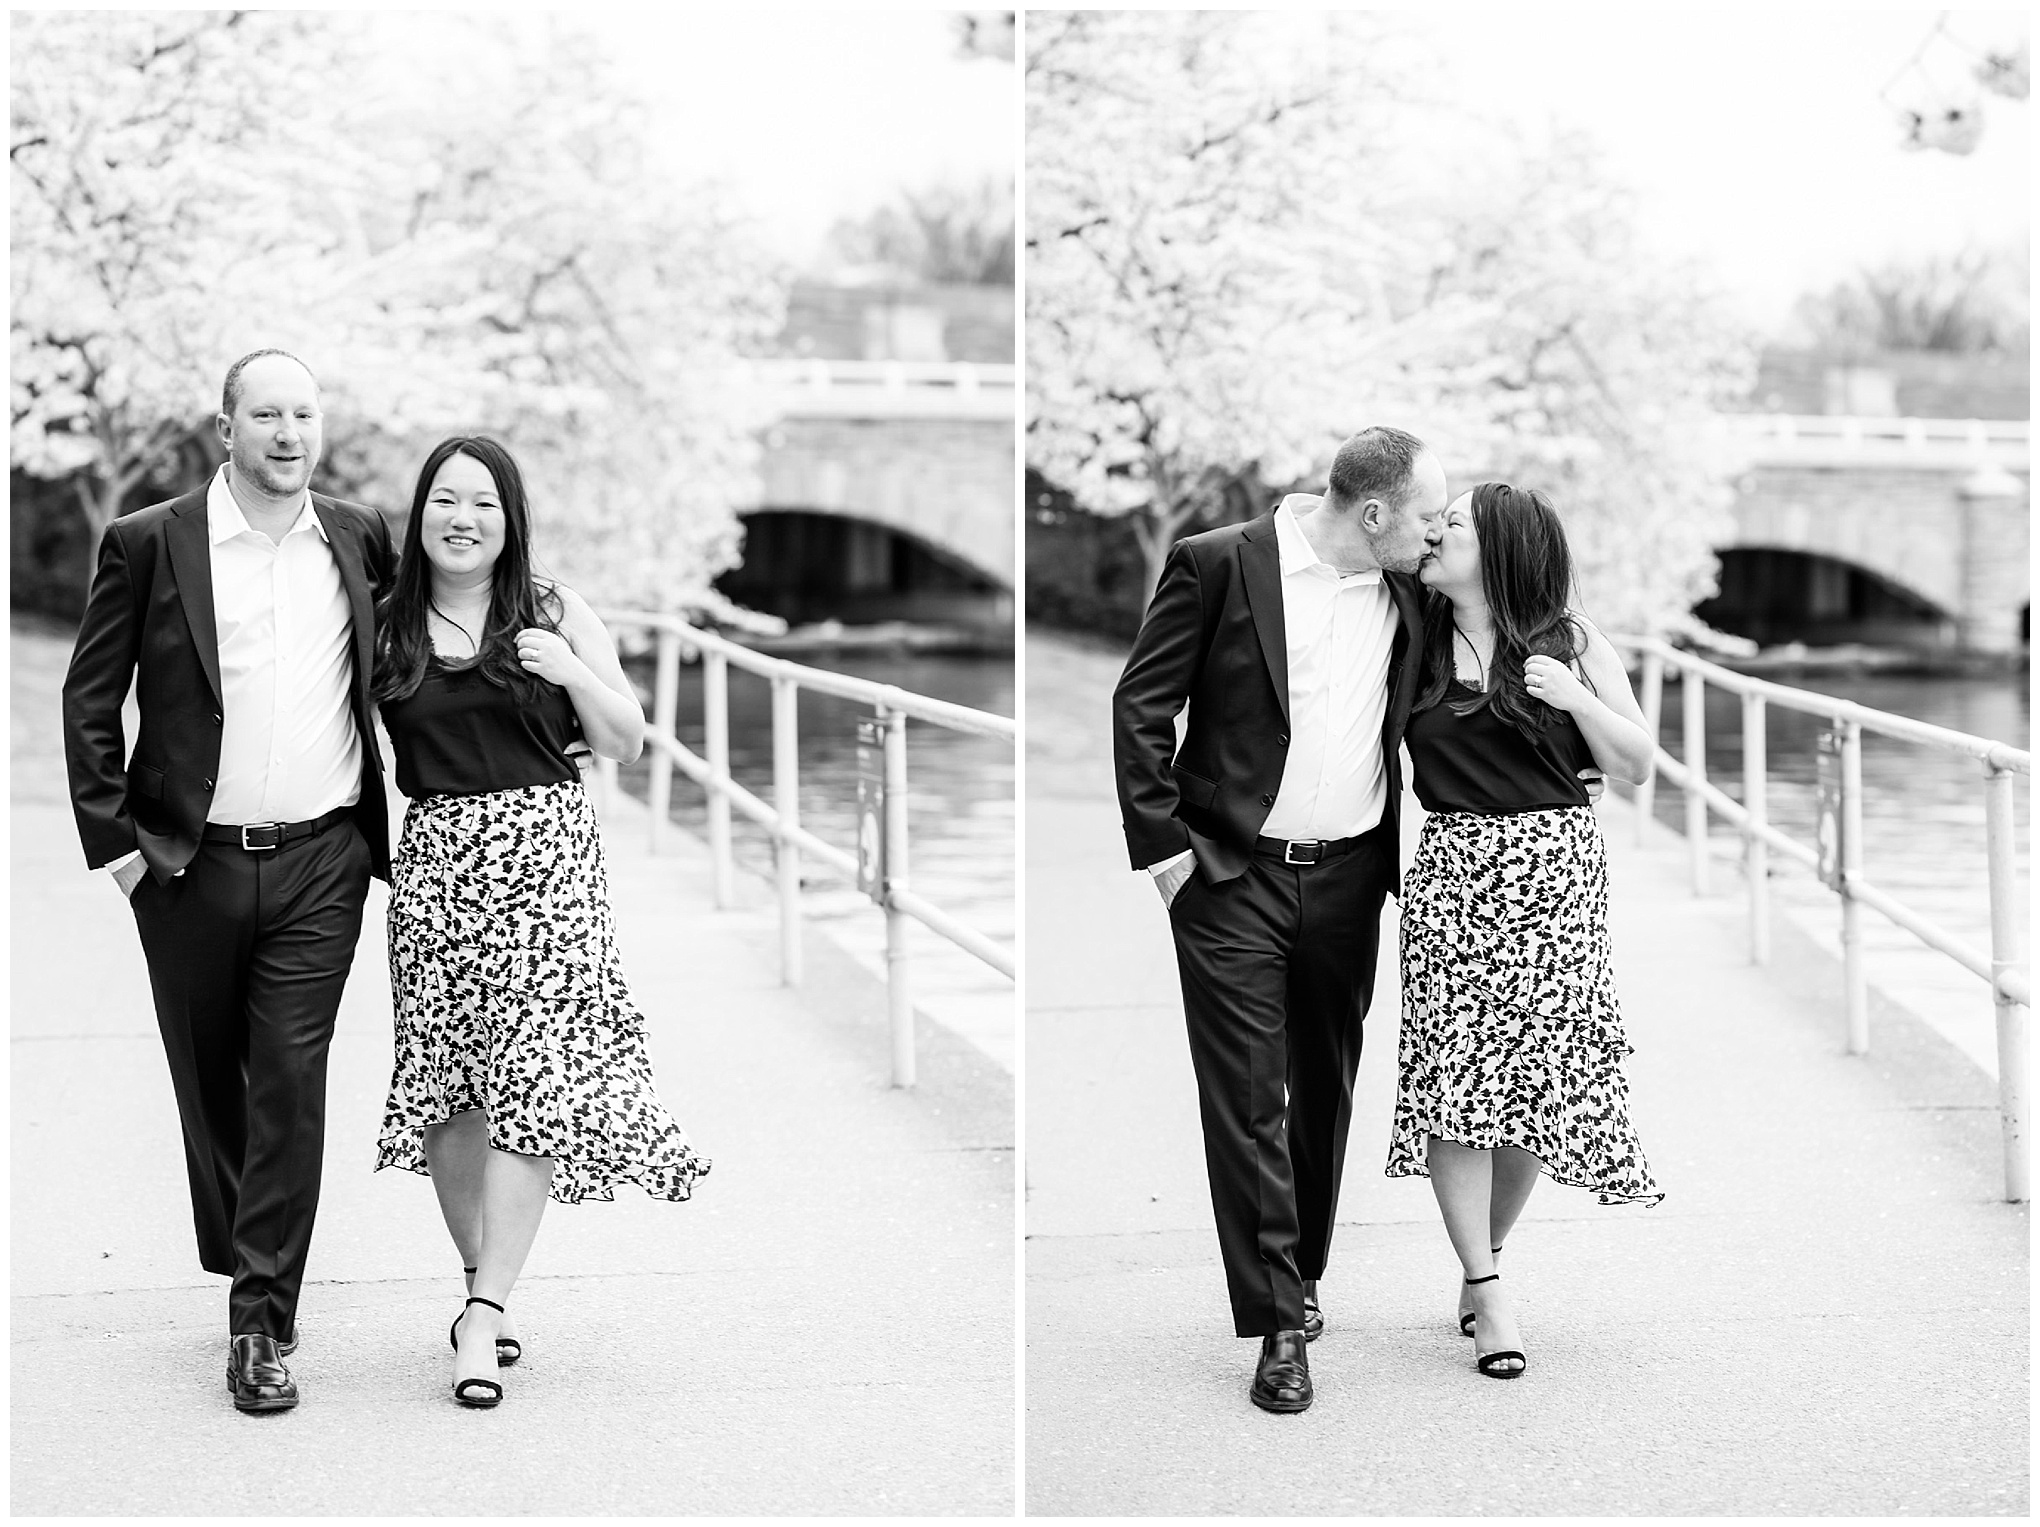 engaged couple, engagement portraits, photo shoot outfit ideas, cherry blossom engagement portraits, cherry blossom portraits, cherry blossoms, DC cherry blossoms, tidal basin, DC tidal basin, white cotton dress, white cotton sleeveless dress, bow sleeves, classic cherry blossom engagement session, D.C. engagement photographer, cherry blossom trees, floral print skirt, black and navy outfit, black and white outfit, black and white photo, couple walking